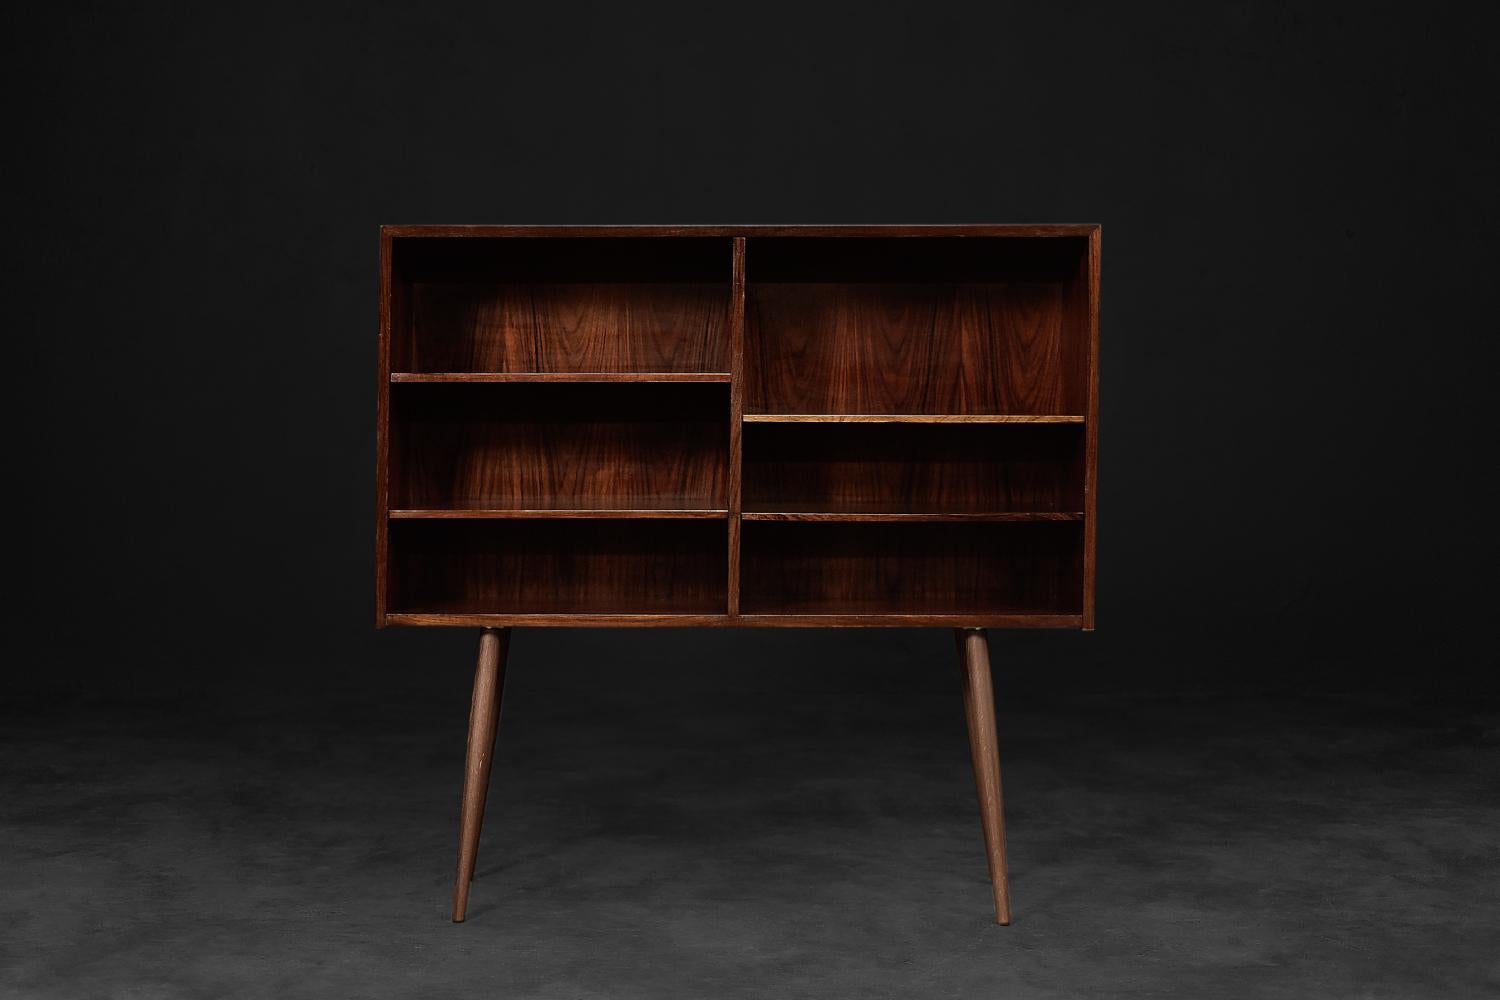 This modernist cabinet was designed by Gunni Omann for the Danish manufacturer Omann Jun Møbelfabrik during the 1960s. It is made of high-quality rosewood. Its structure is very strong, with expressive graining, which gives furniture made of this